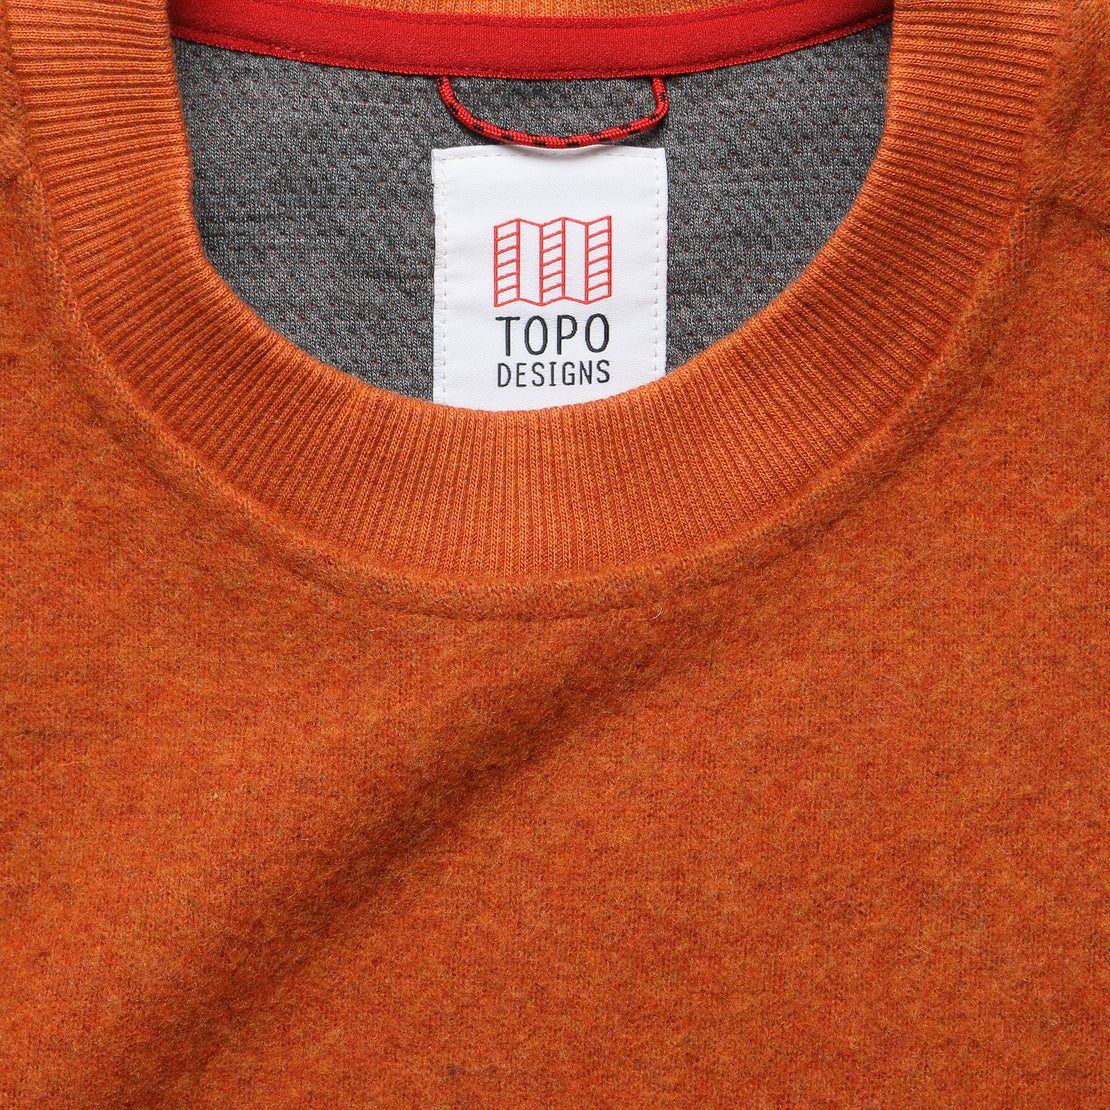 Global Sweater - Clay - Topo Designs - STAG Provisions - Tops - Sweater